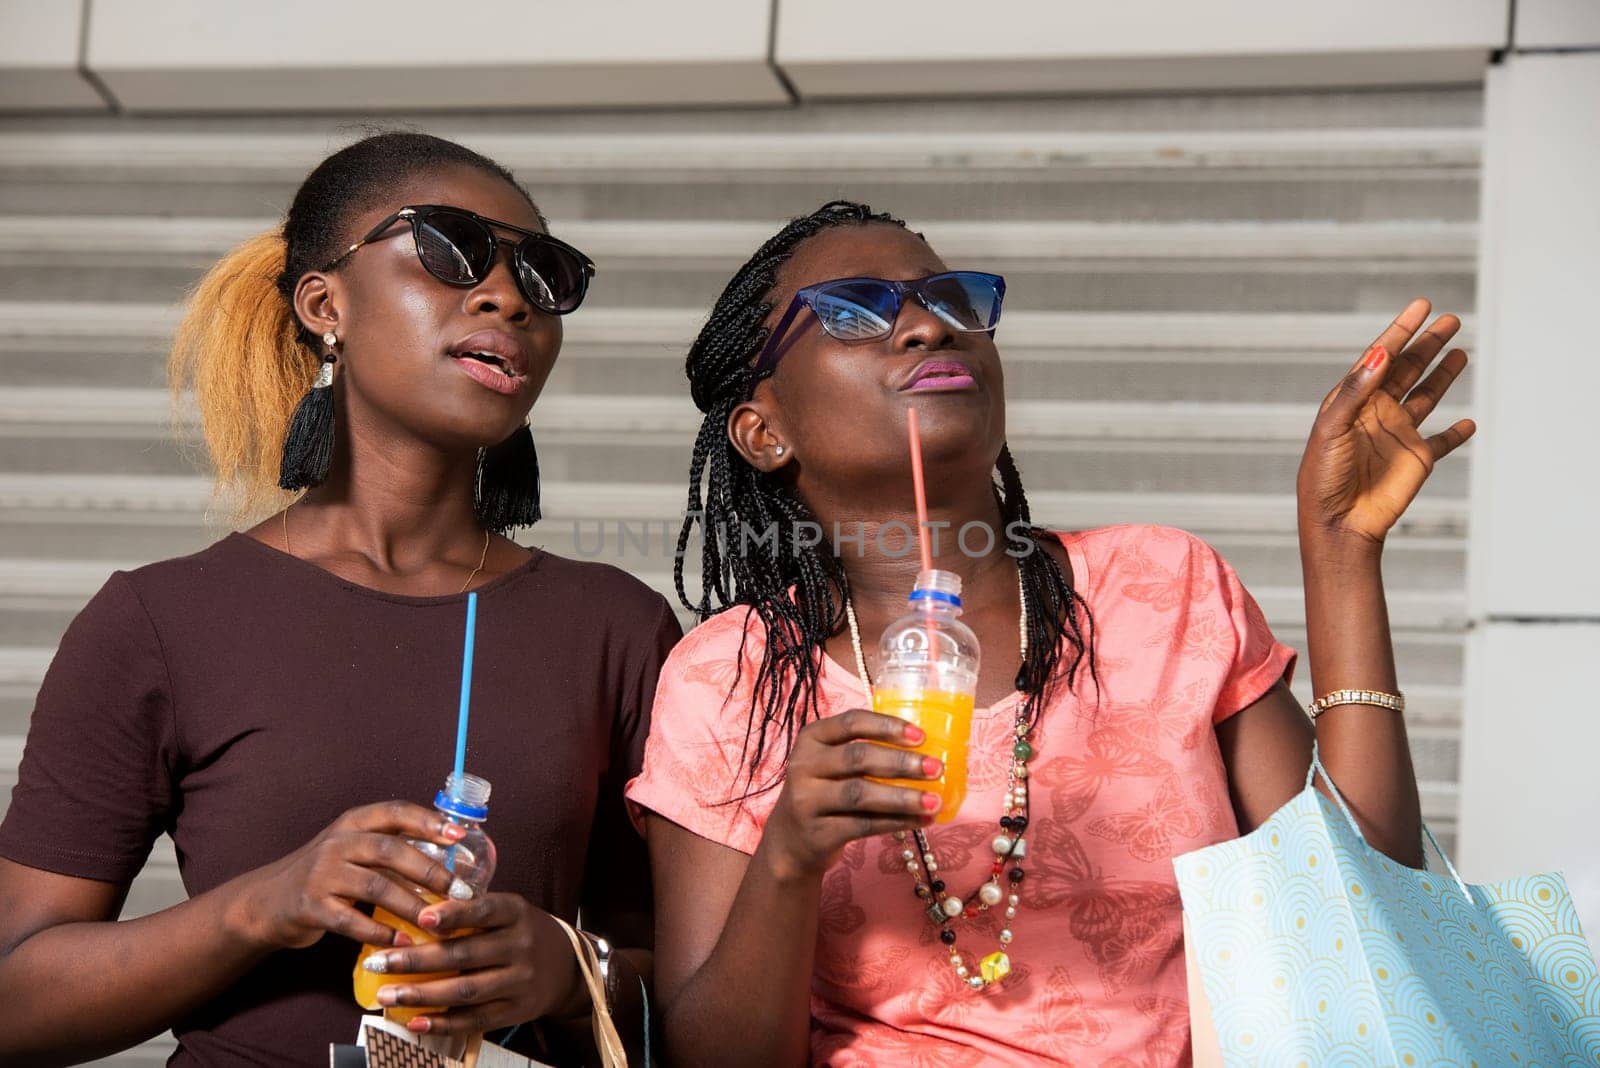 Young girls standing in glasses looking up there with bottles of juice in hand after shopping.